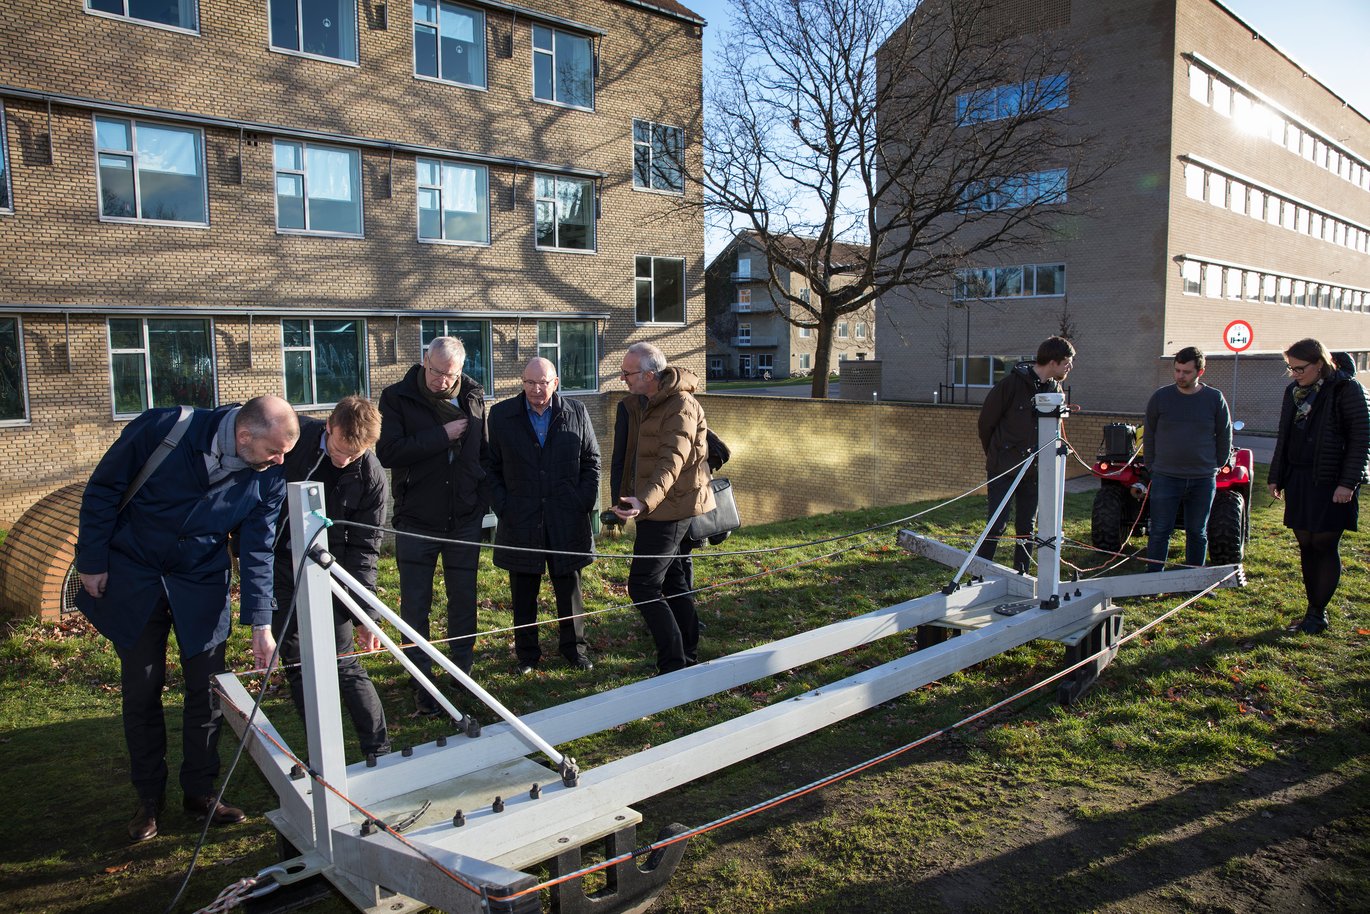 Esben Auken shows the guests a large metal structure on the lawn in Aarhus University's campus.